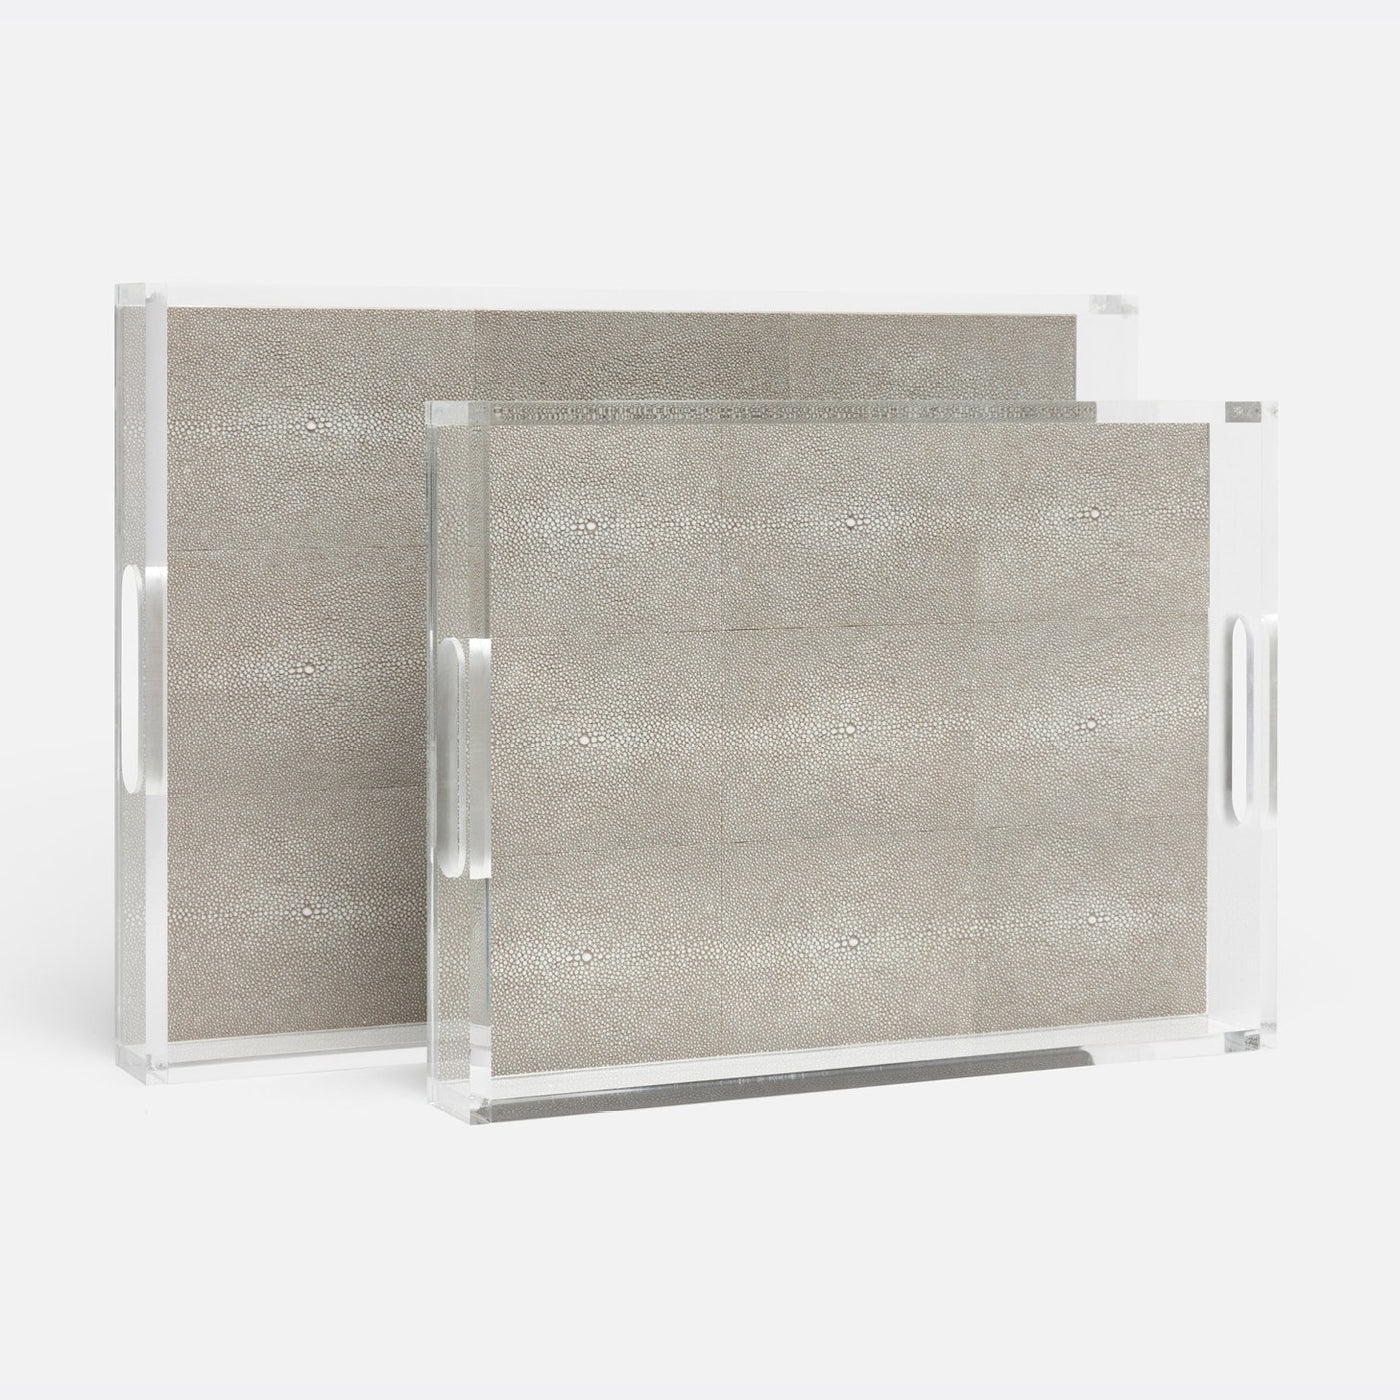 TRAY ACRYLIC WITH SAND FAUX SHAGREEN INSERT (Available in 2 Sizes)